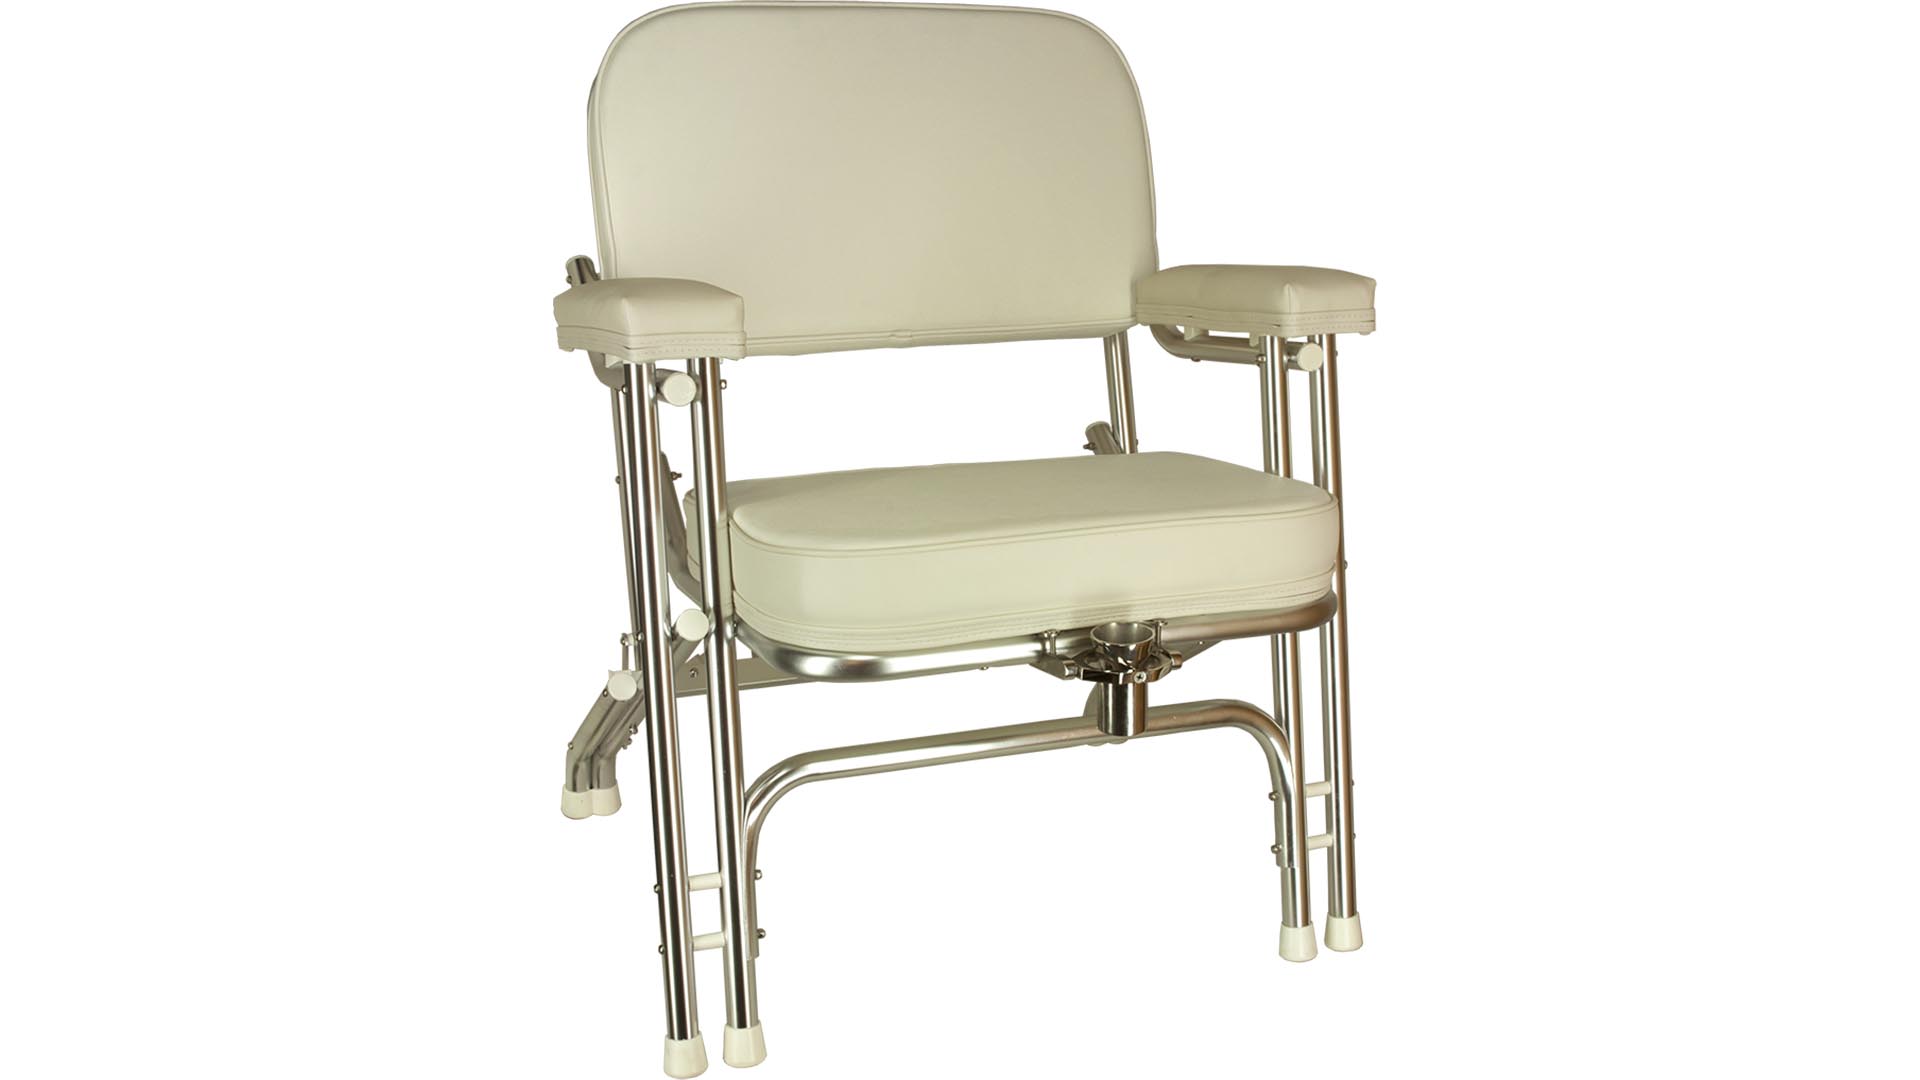 Springfield Marine Deck Folding Chair - White with Embroidered Back  1080021-EMB - The Home Depot